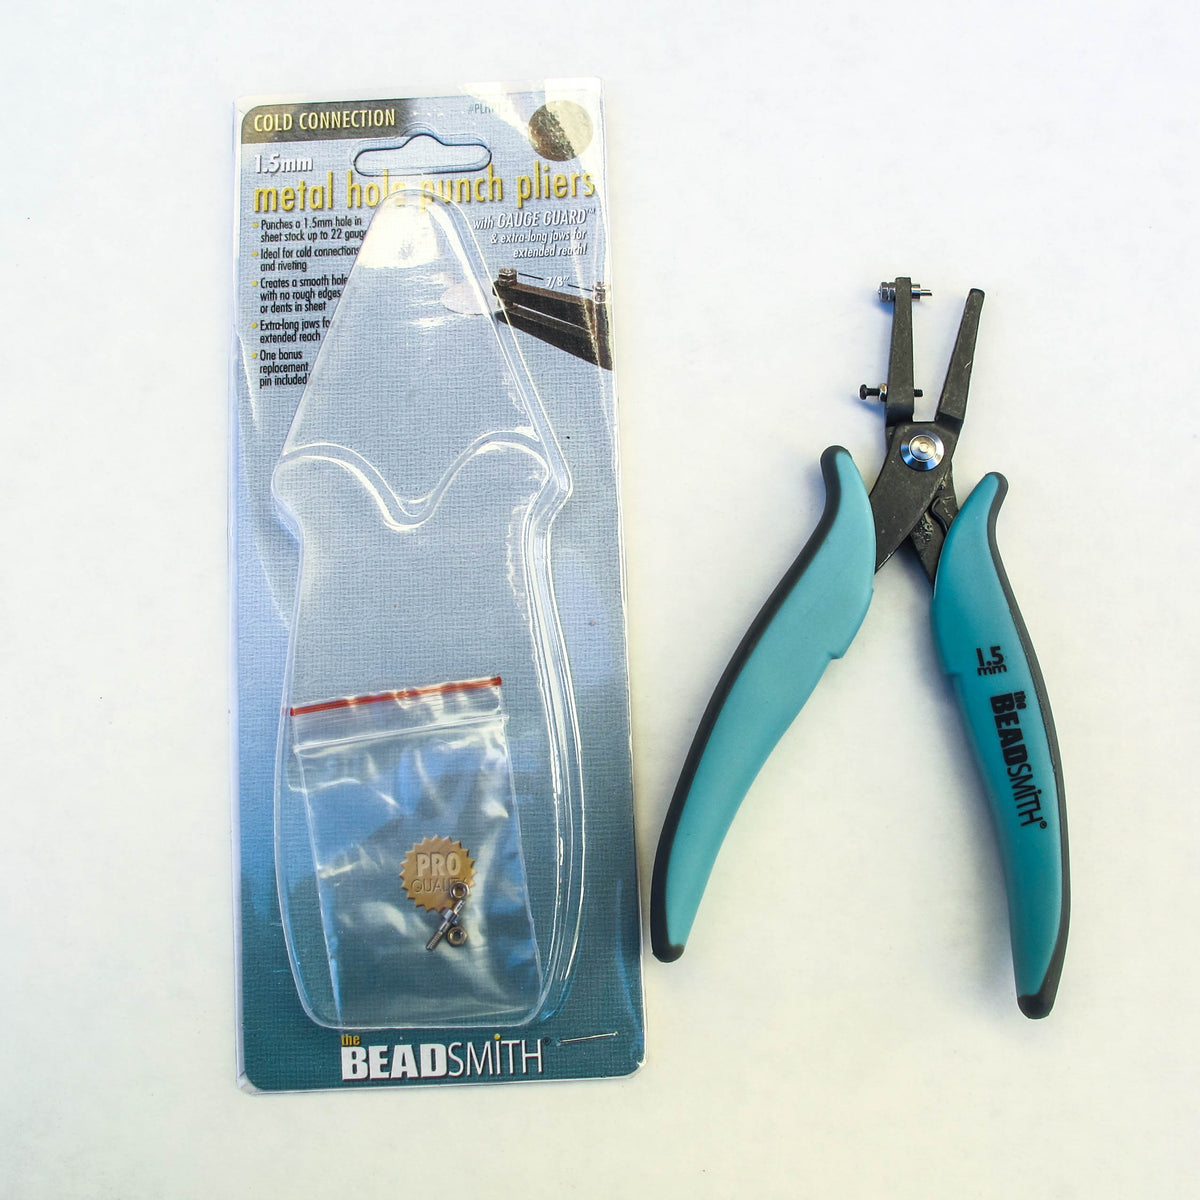 Metal Hole Punch Plier 1.8mm